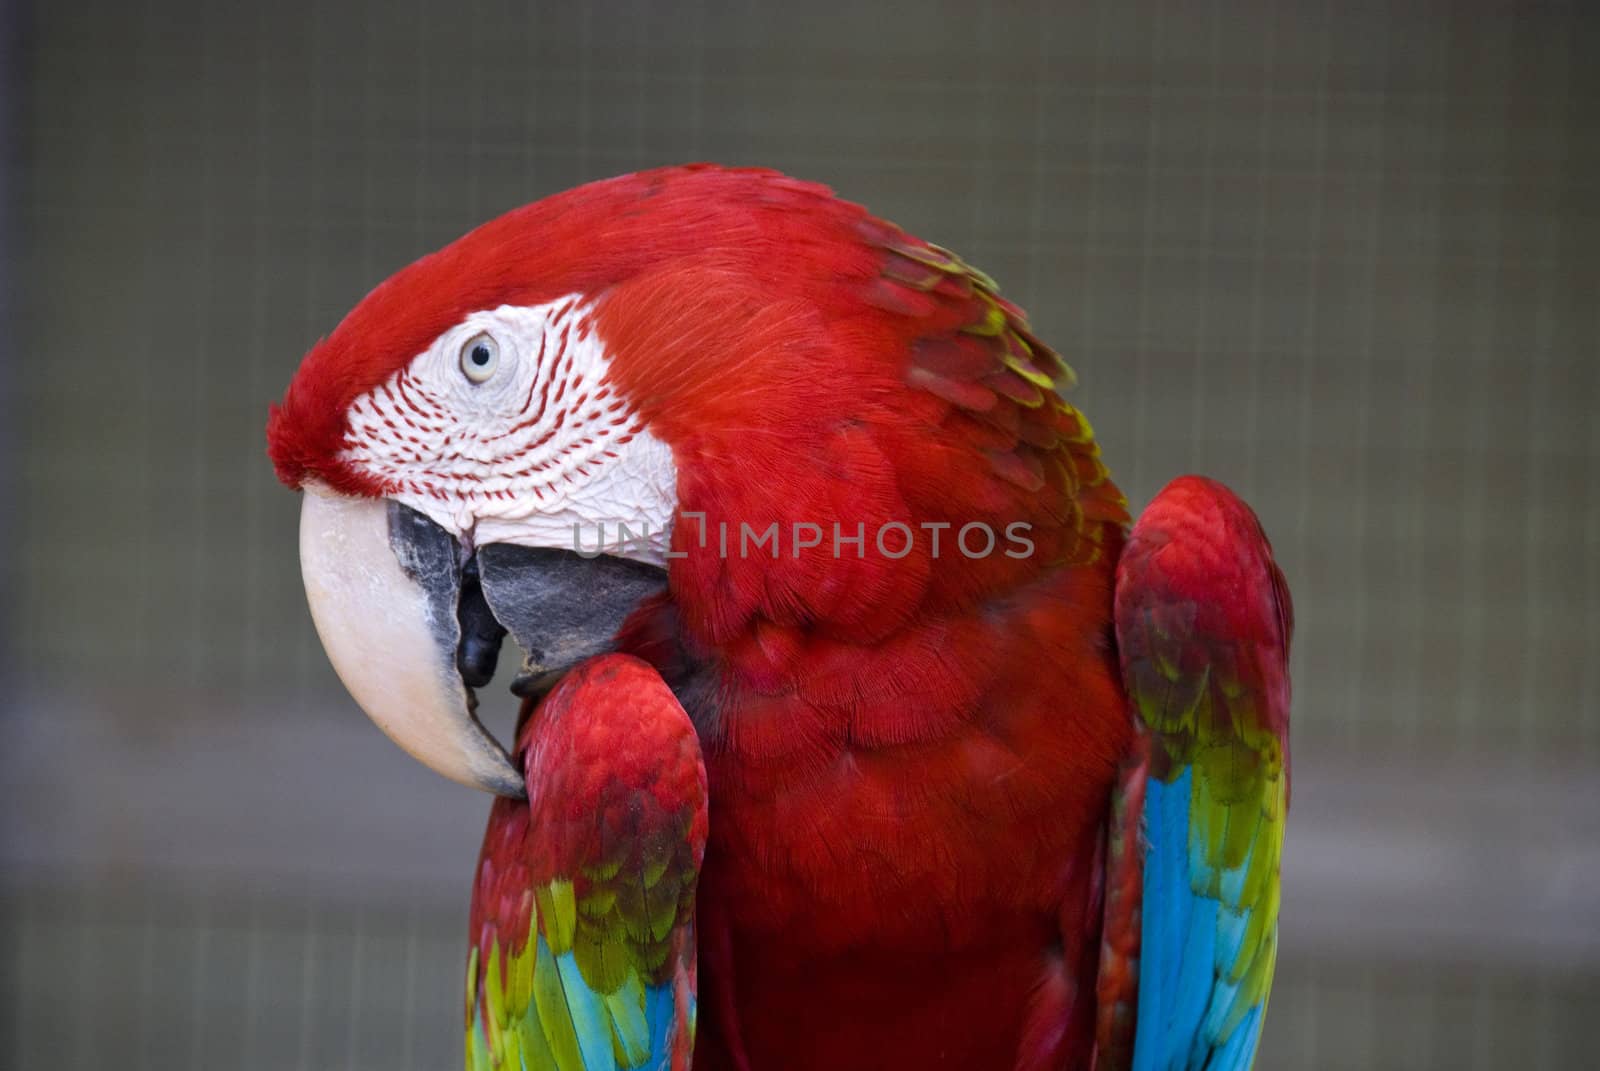 Red Parrot, Kuala Lumpur, 2009 by jovannig